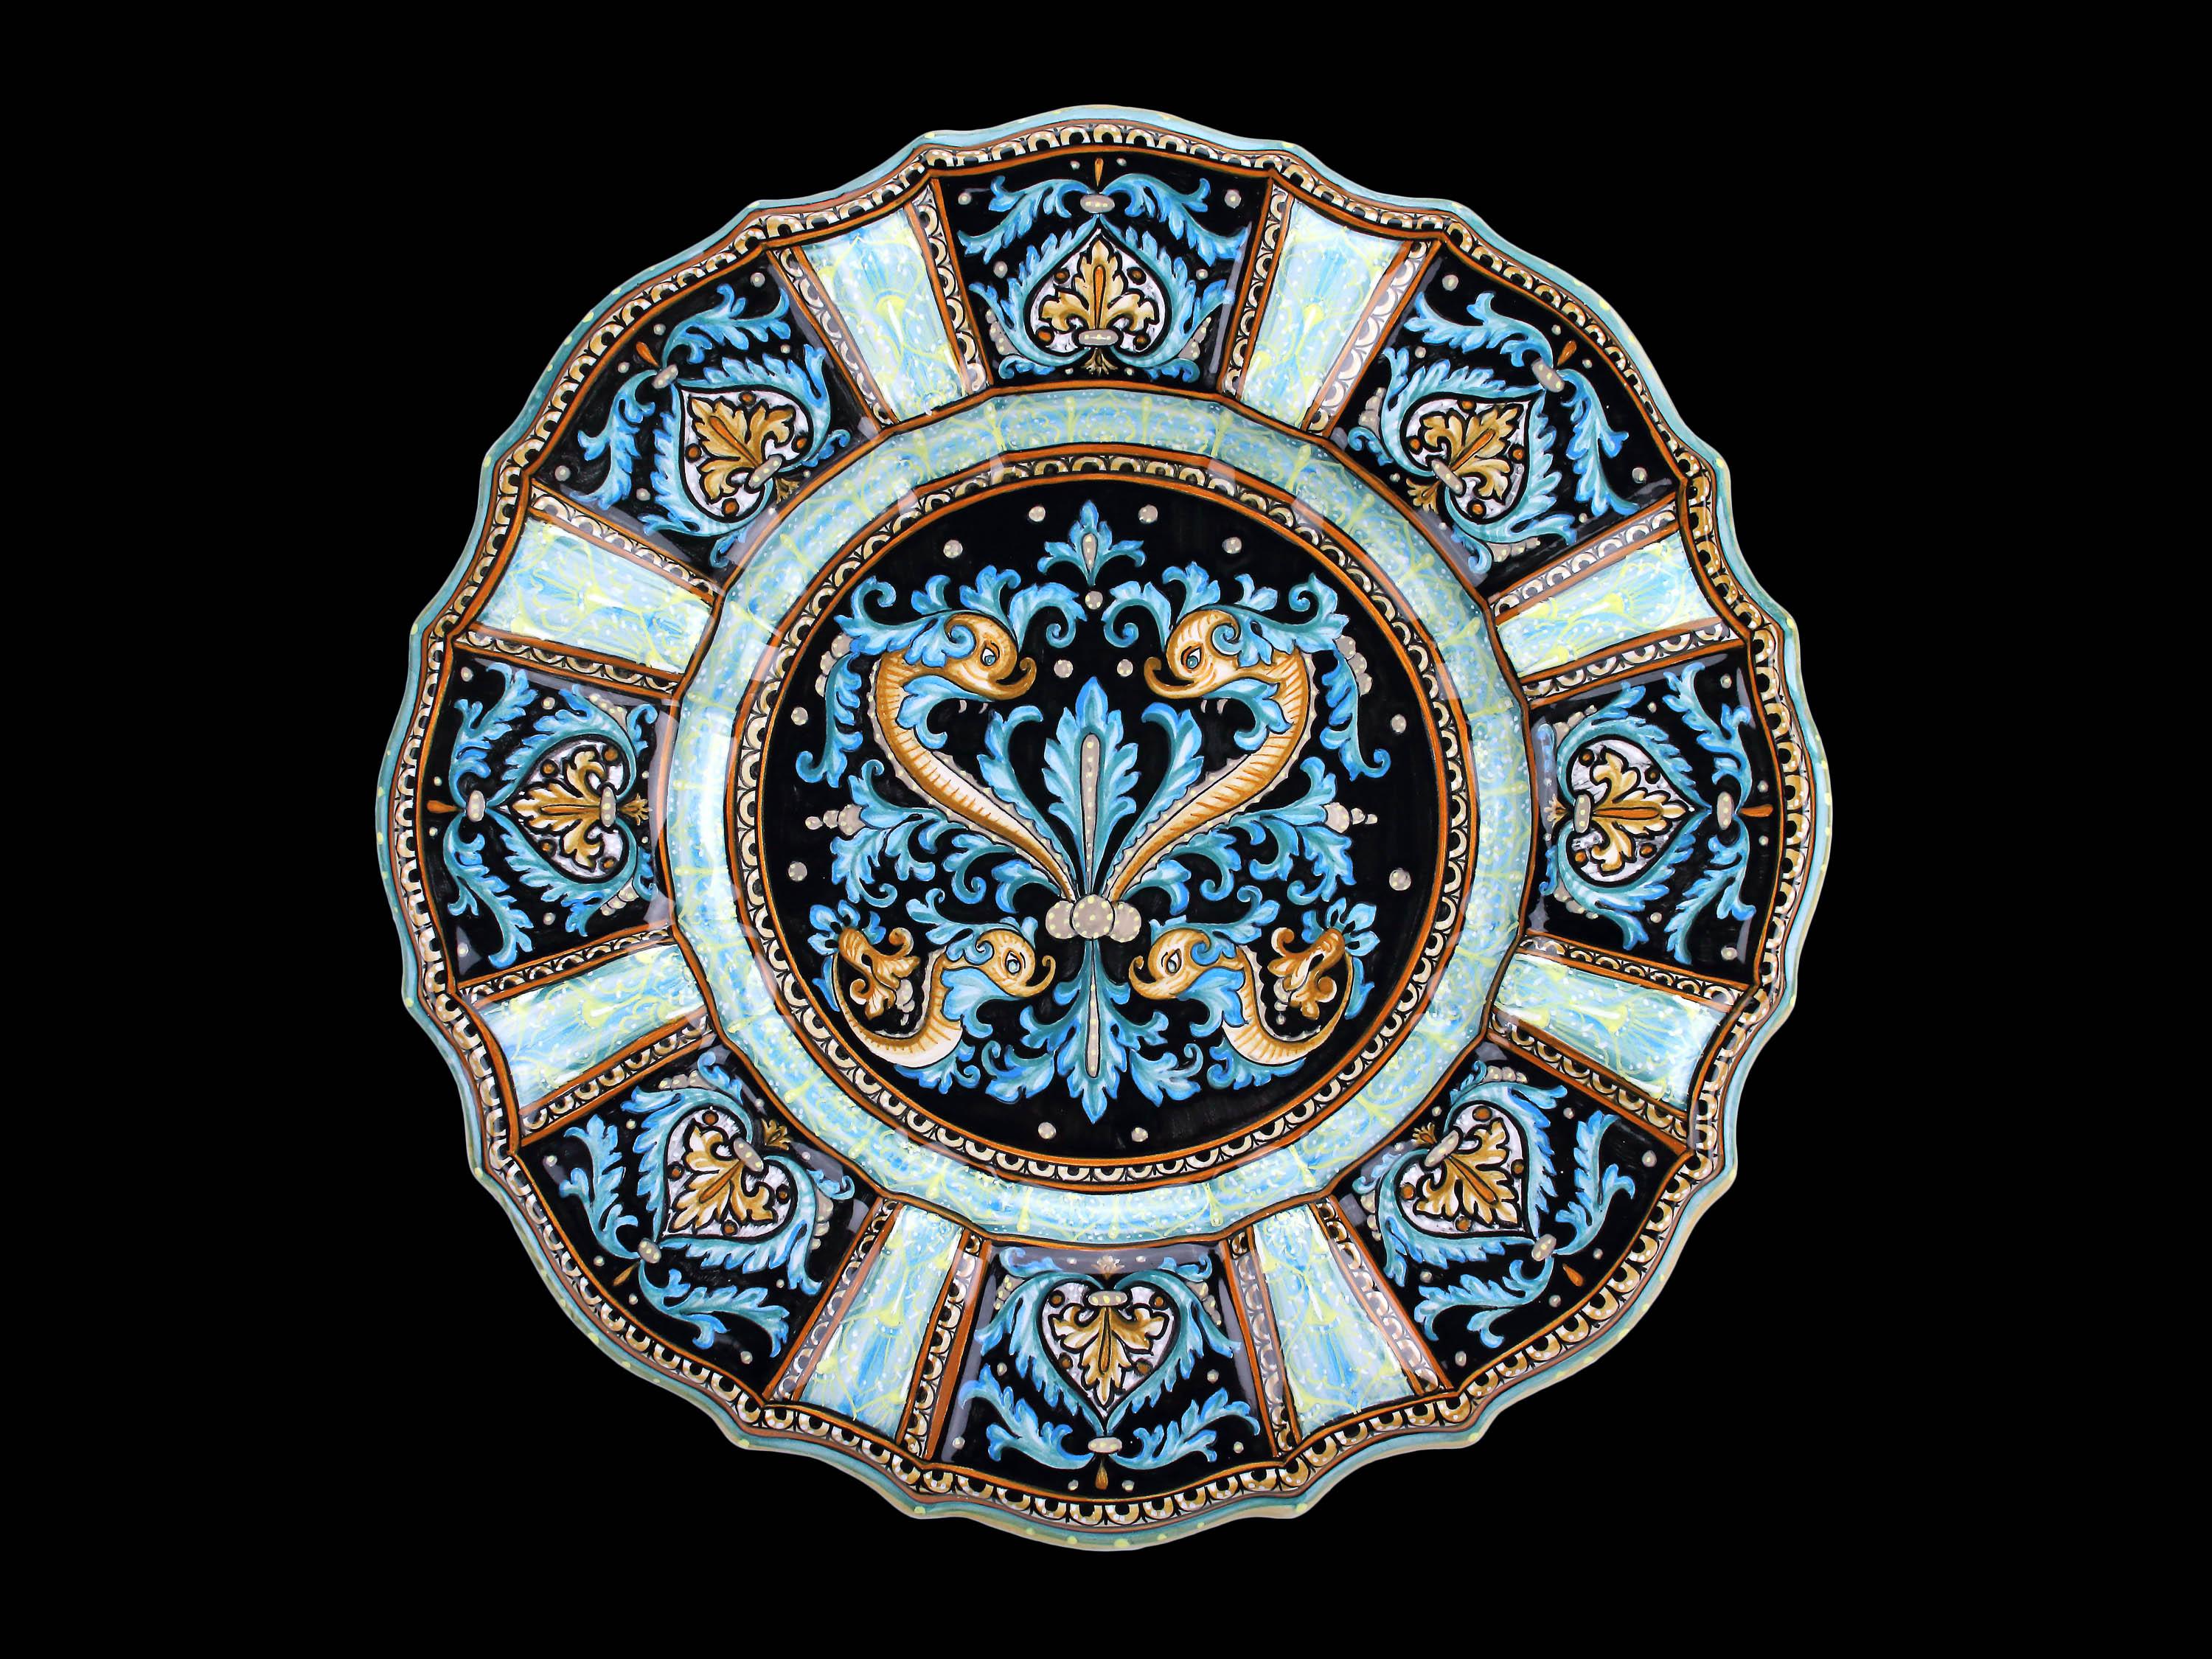 Majolica dish hand made and hand-painted in Deruta, Italy, according to the original Renaissance painting technique. The dish is enriched by the presence of four metamorphic dolphin-like figures arranged symmetrically; the dolphin in antiquity